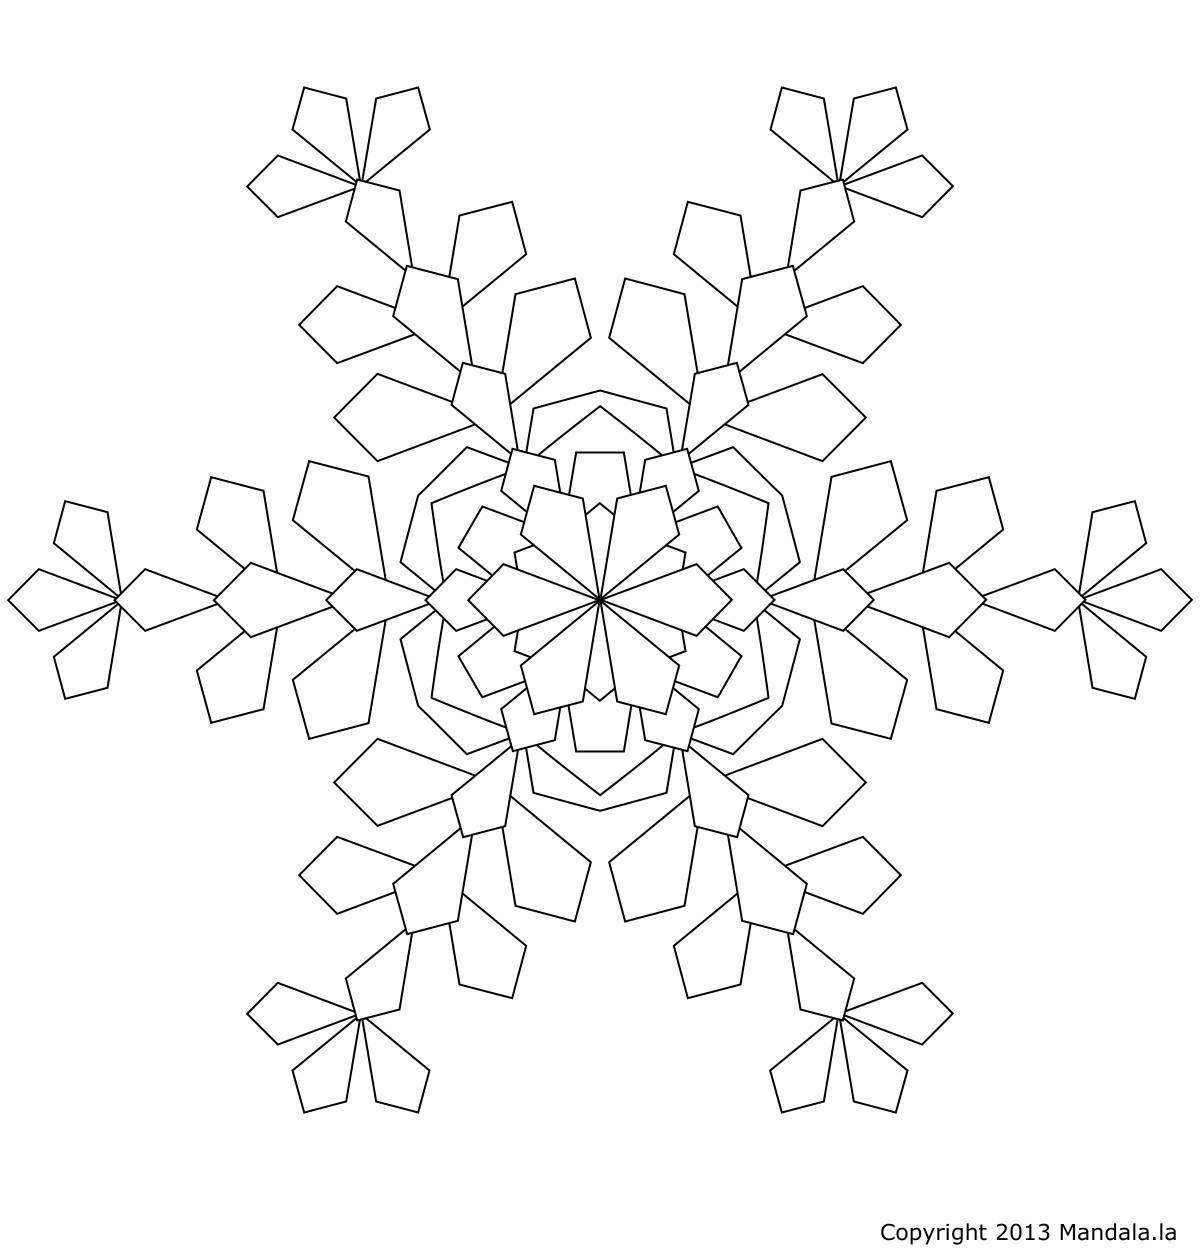 Adorable snowflake coloring book for kids 6-7 years old